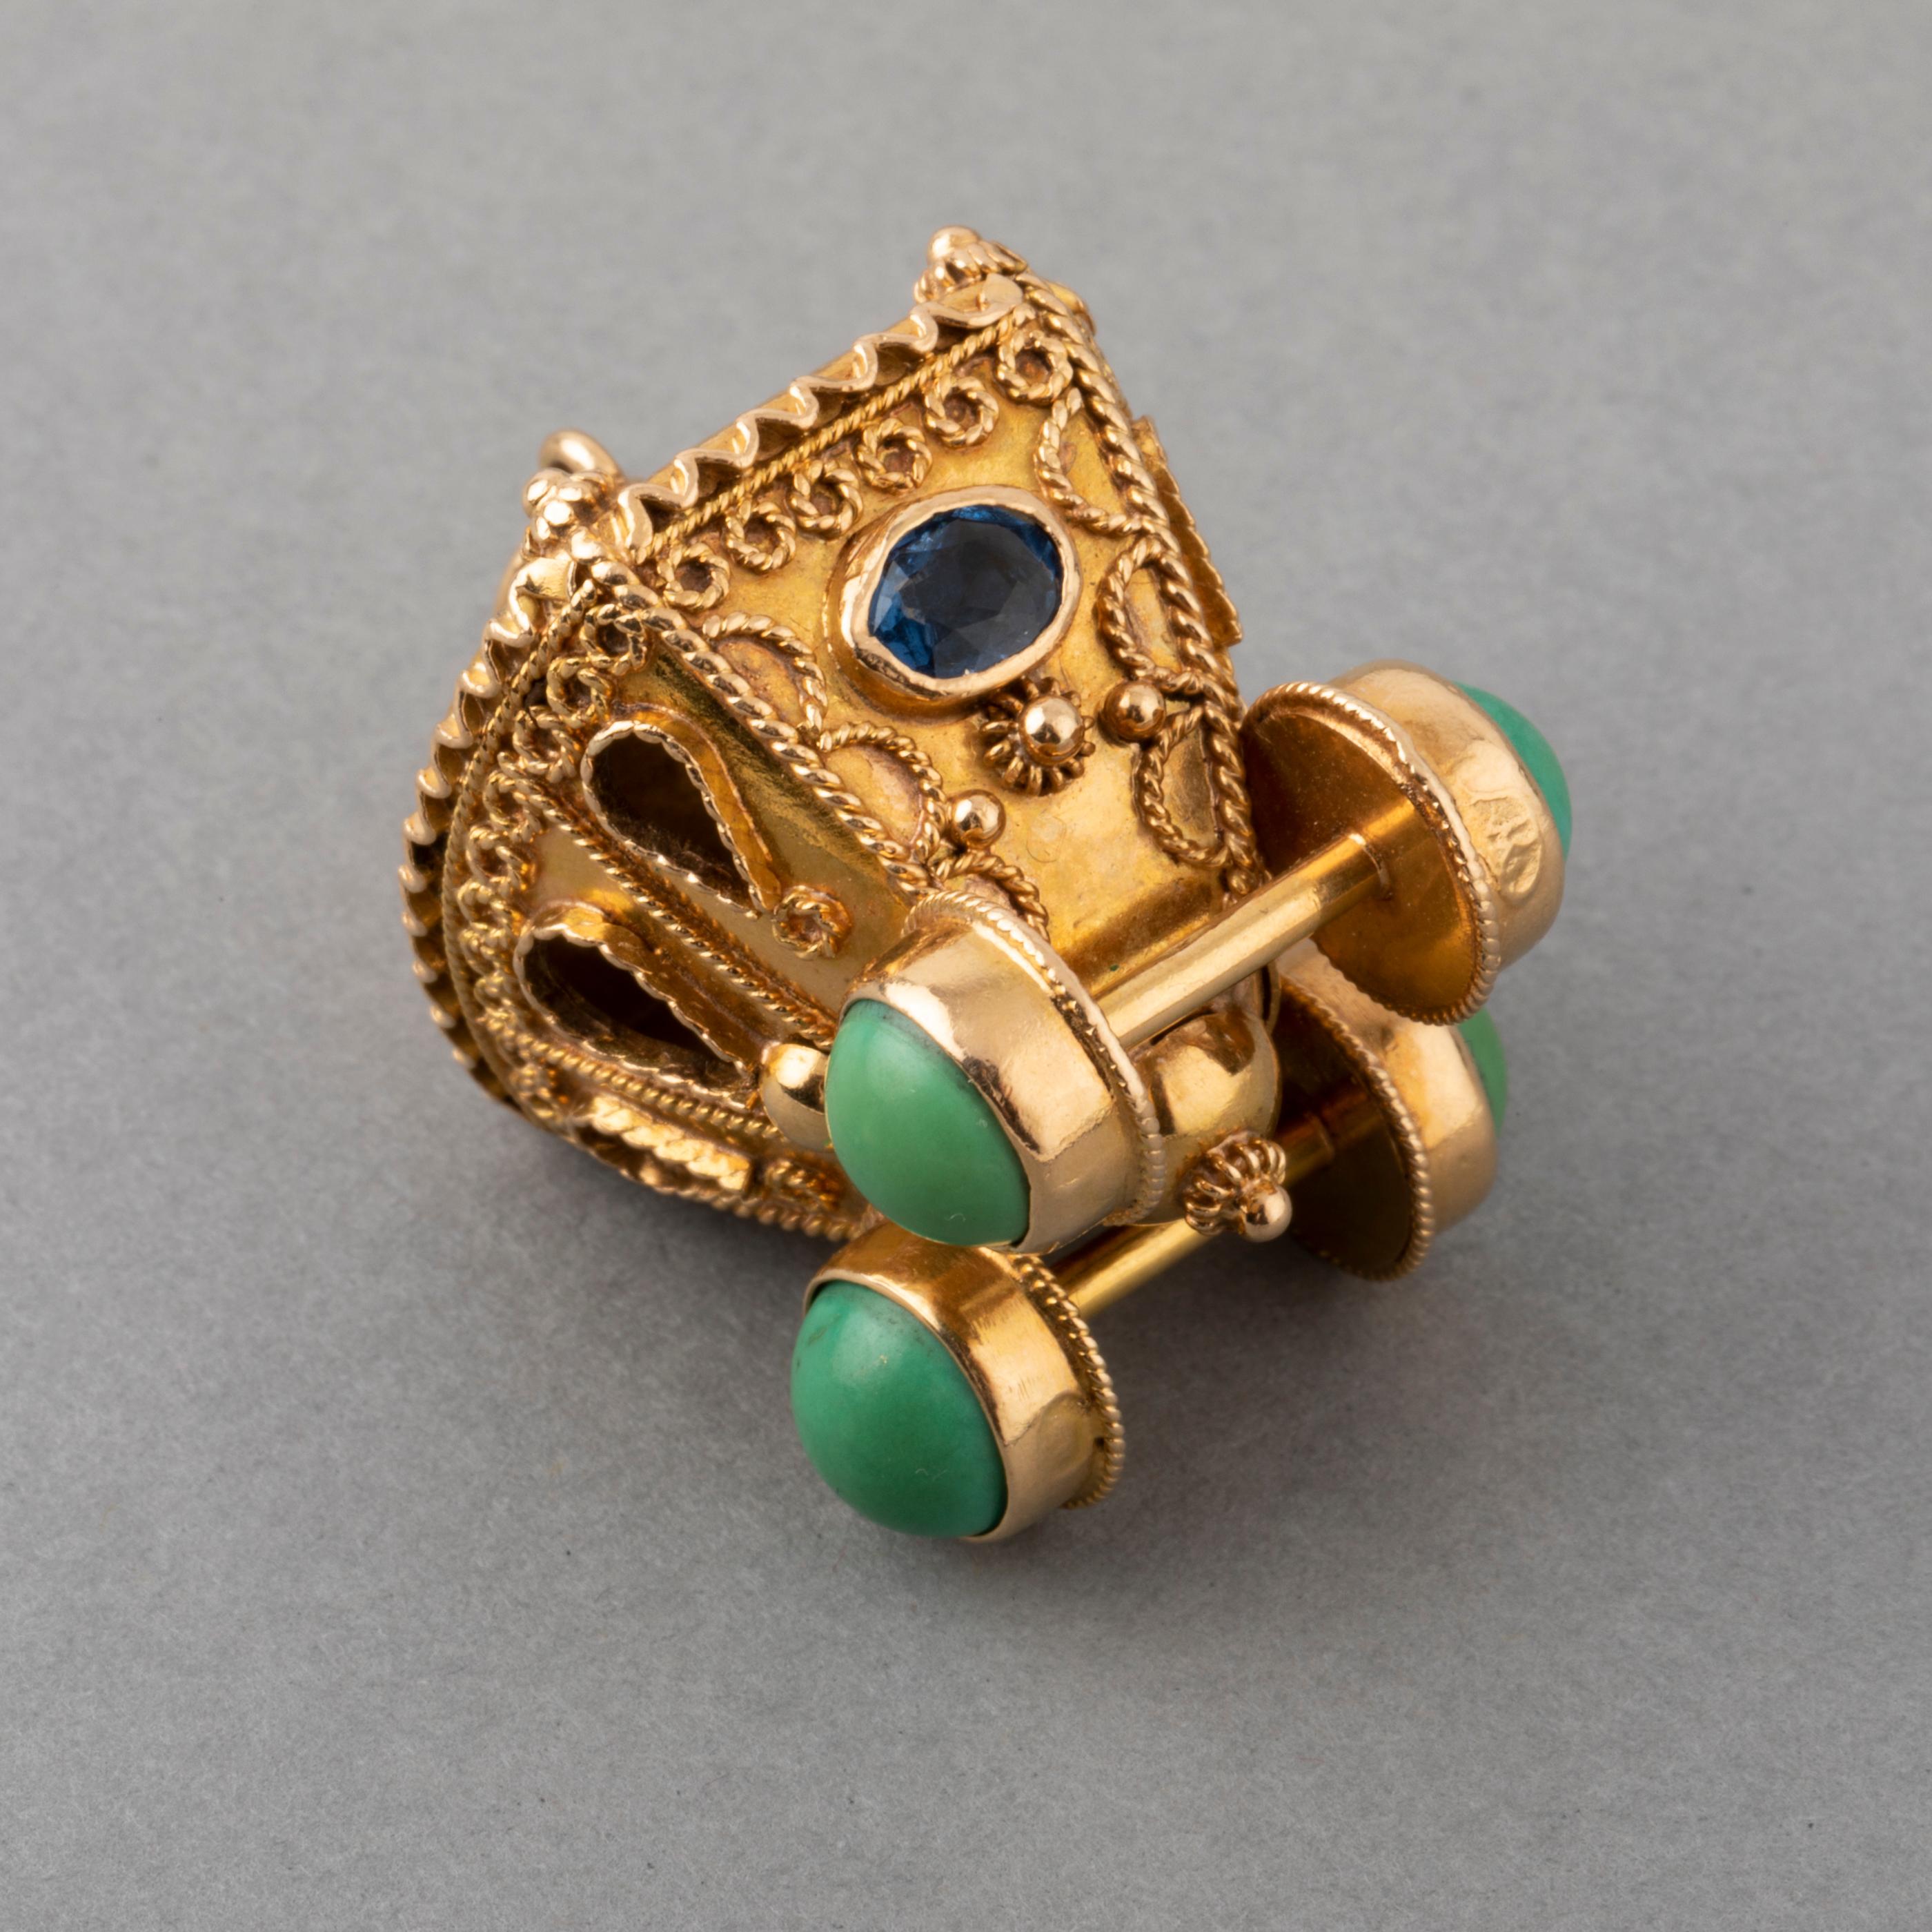 Gold and Turquoise Vintage Charm

  Very beautiful charm, made in Italy circa 1960. Made in yellow gold 18k (mark for gold). I controlled the gold in Paris so they have French marks (the owl)
The condition is good. The design is a coach, very